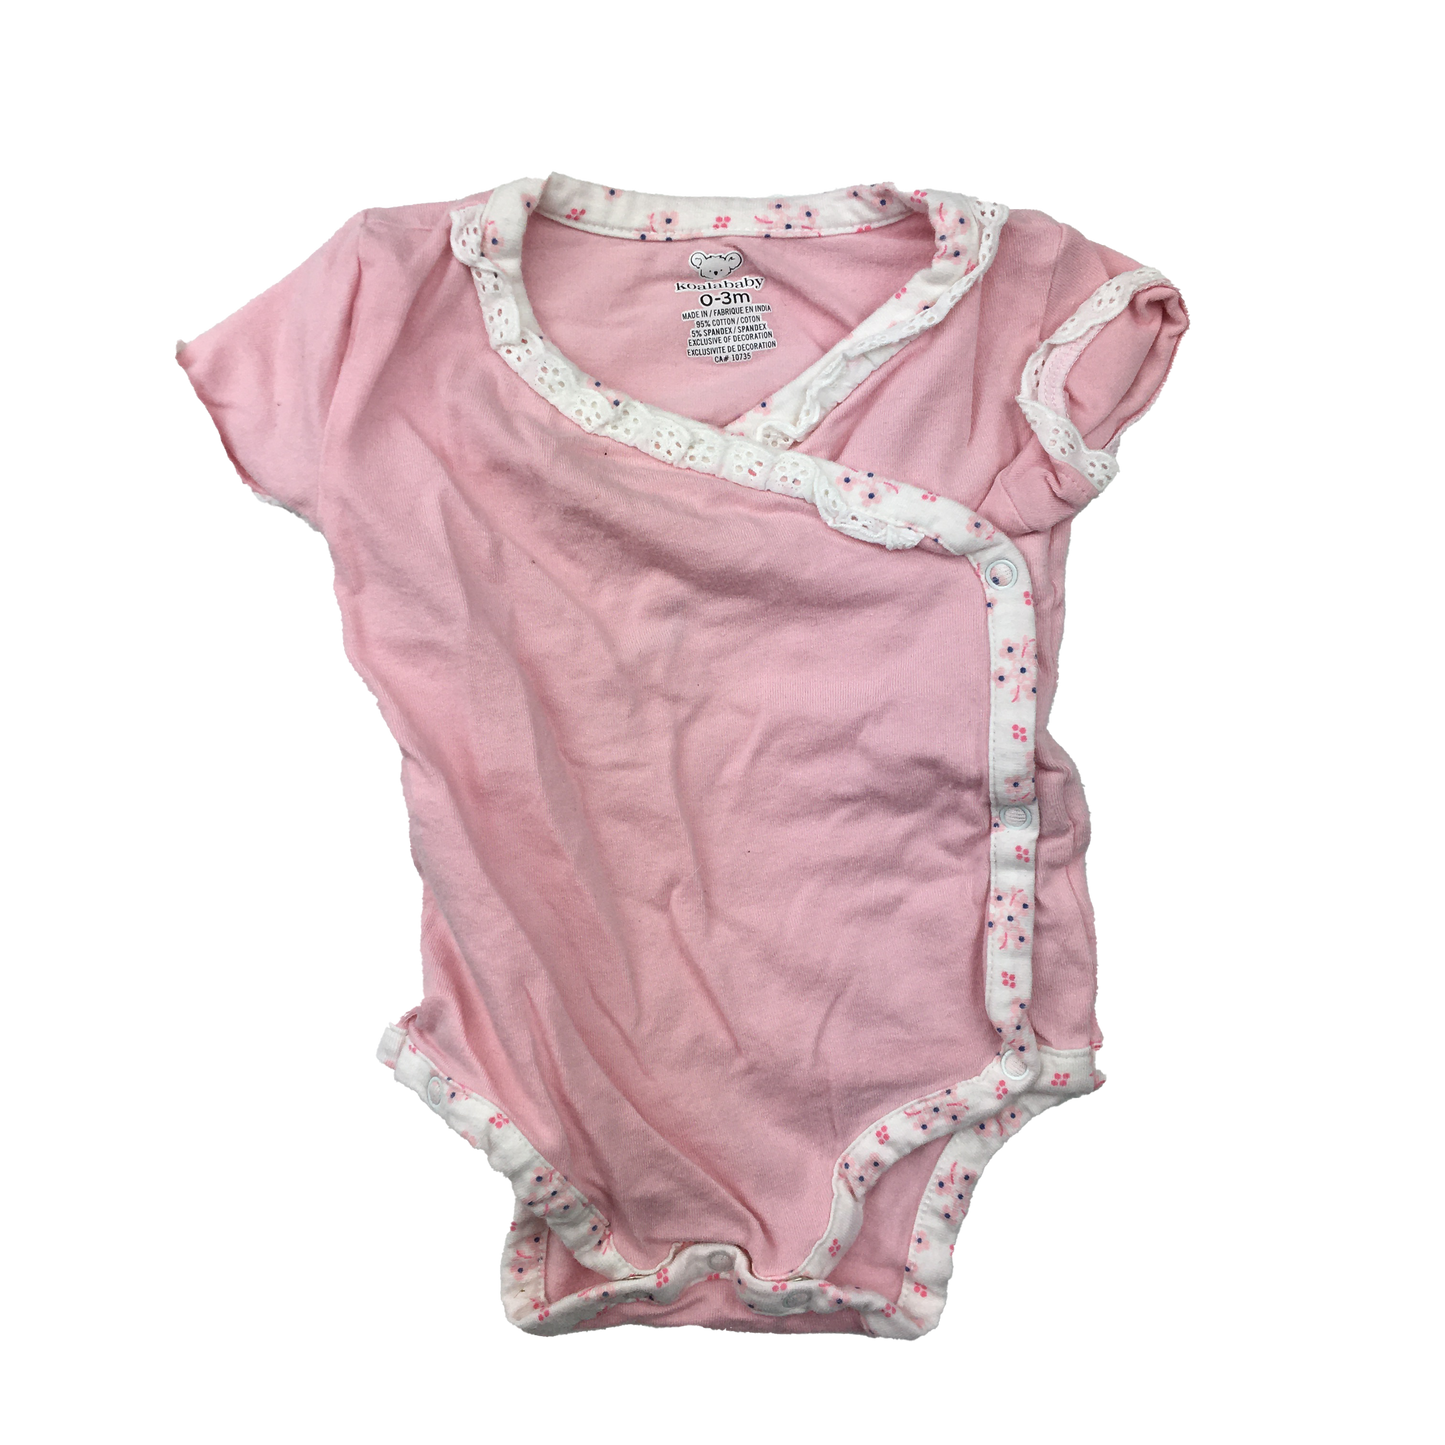 Koala Baby Pink with White Floral Trim 0-3M